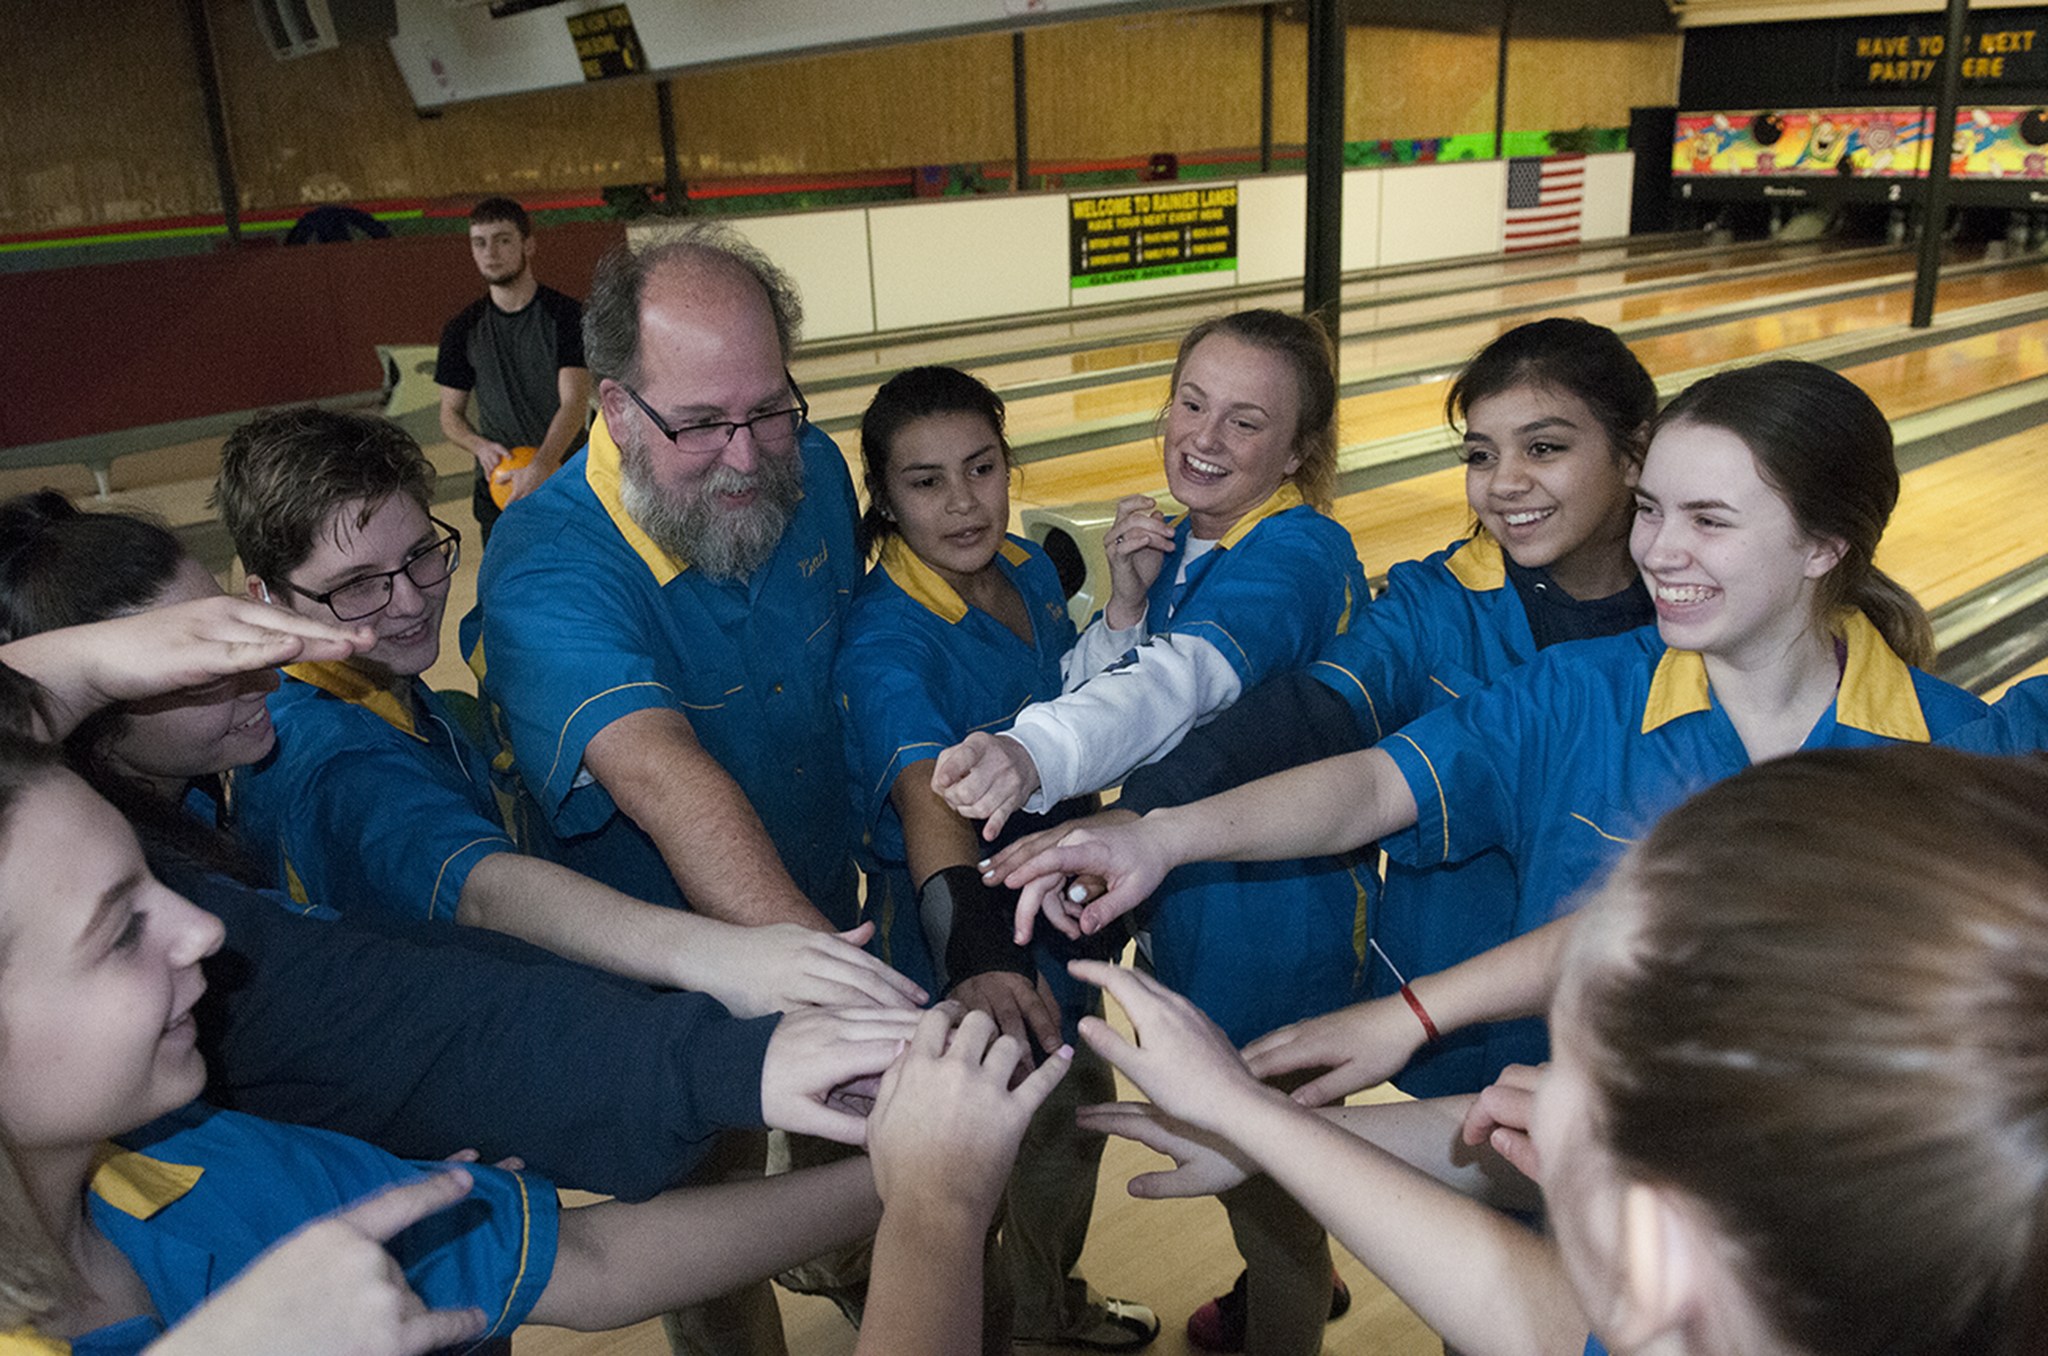 (Brendan Carl | The Daily World) Aberdeen’s girls bowling team get together for a cheer prior to the start of Thursday’s non-league dual meet against Capital at Rainier Lanes. The Bobcats finished their regular-season schedule with a 5-0 dual meet sweep of the Cougars.